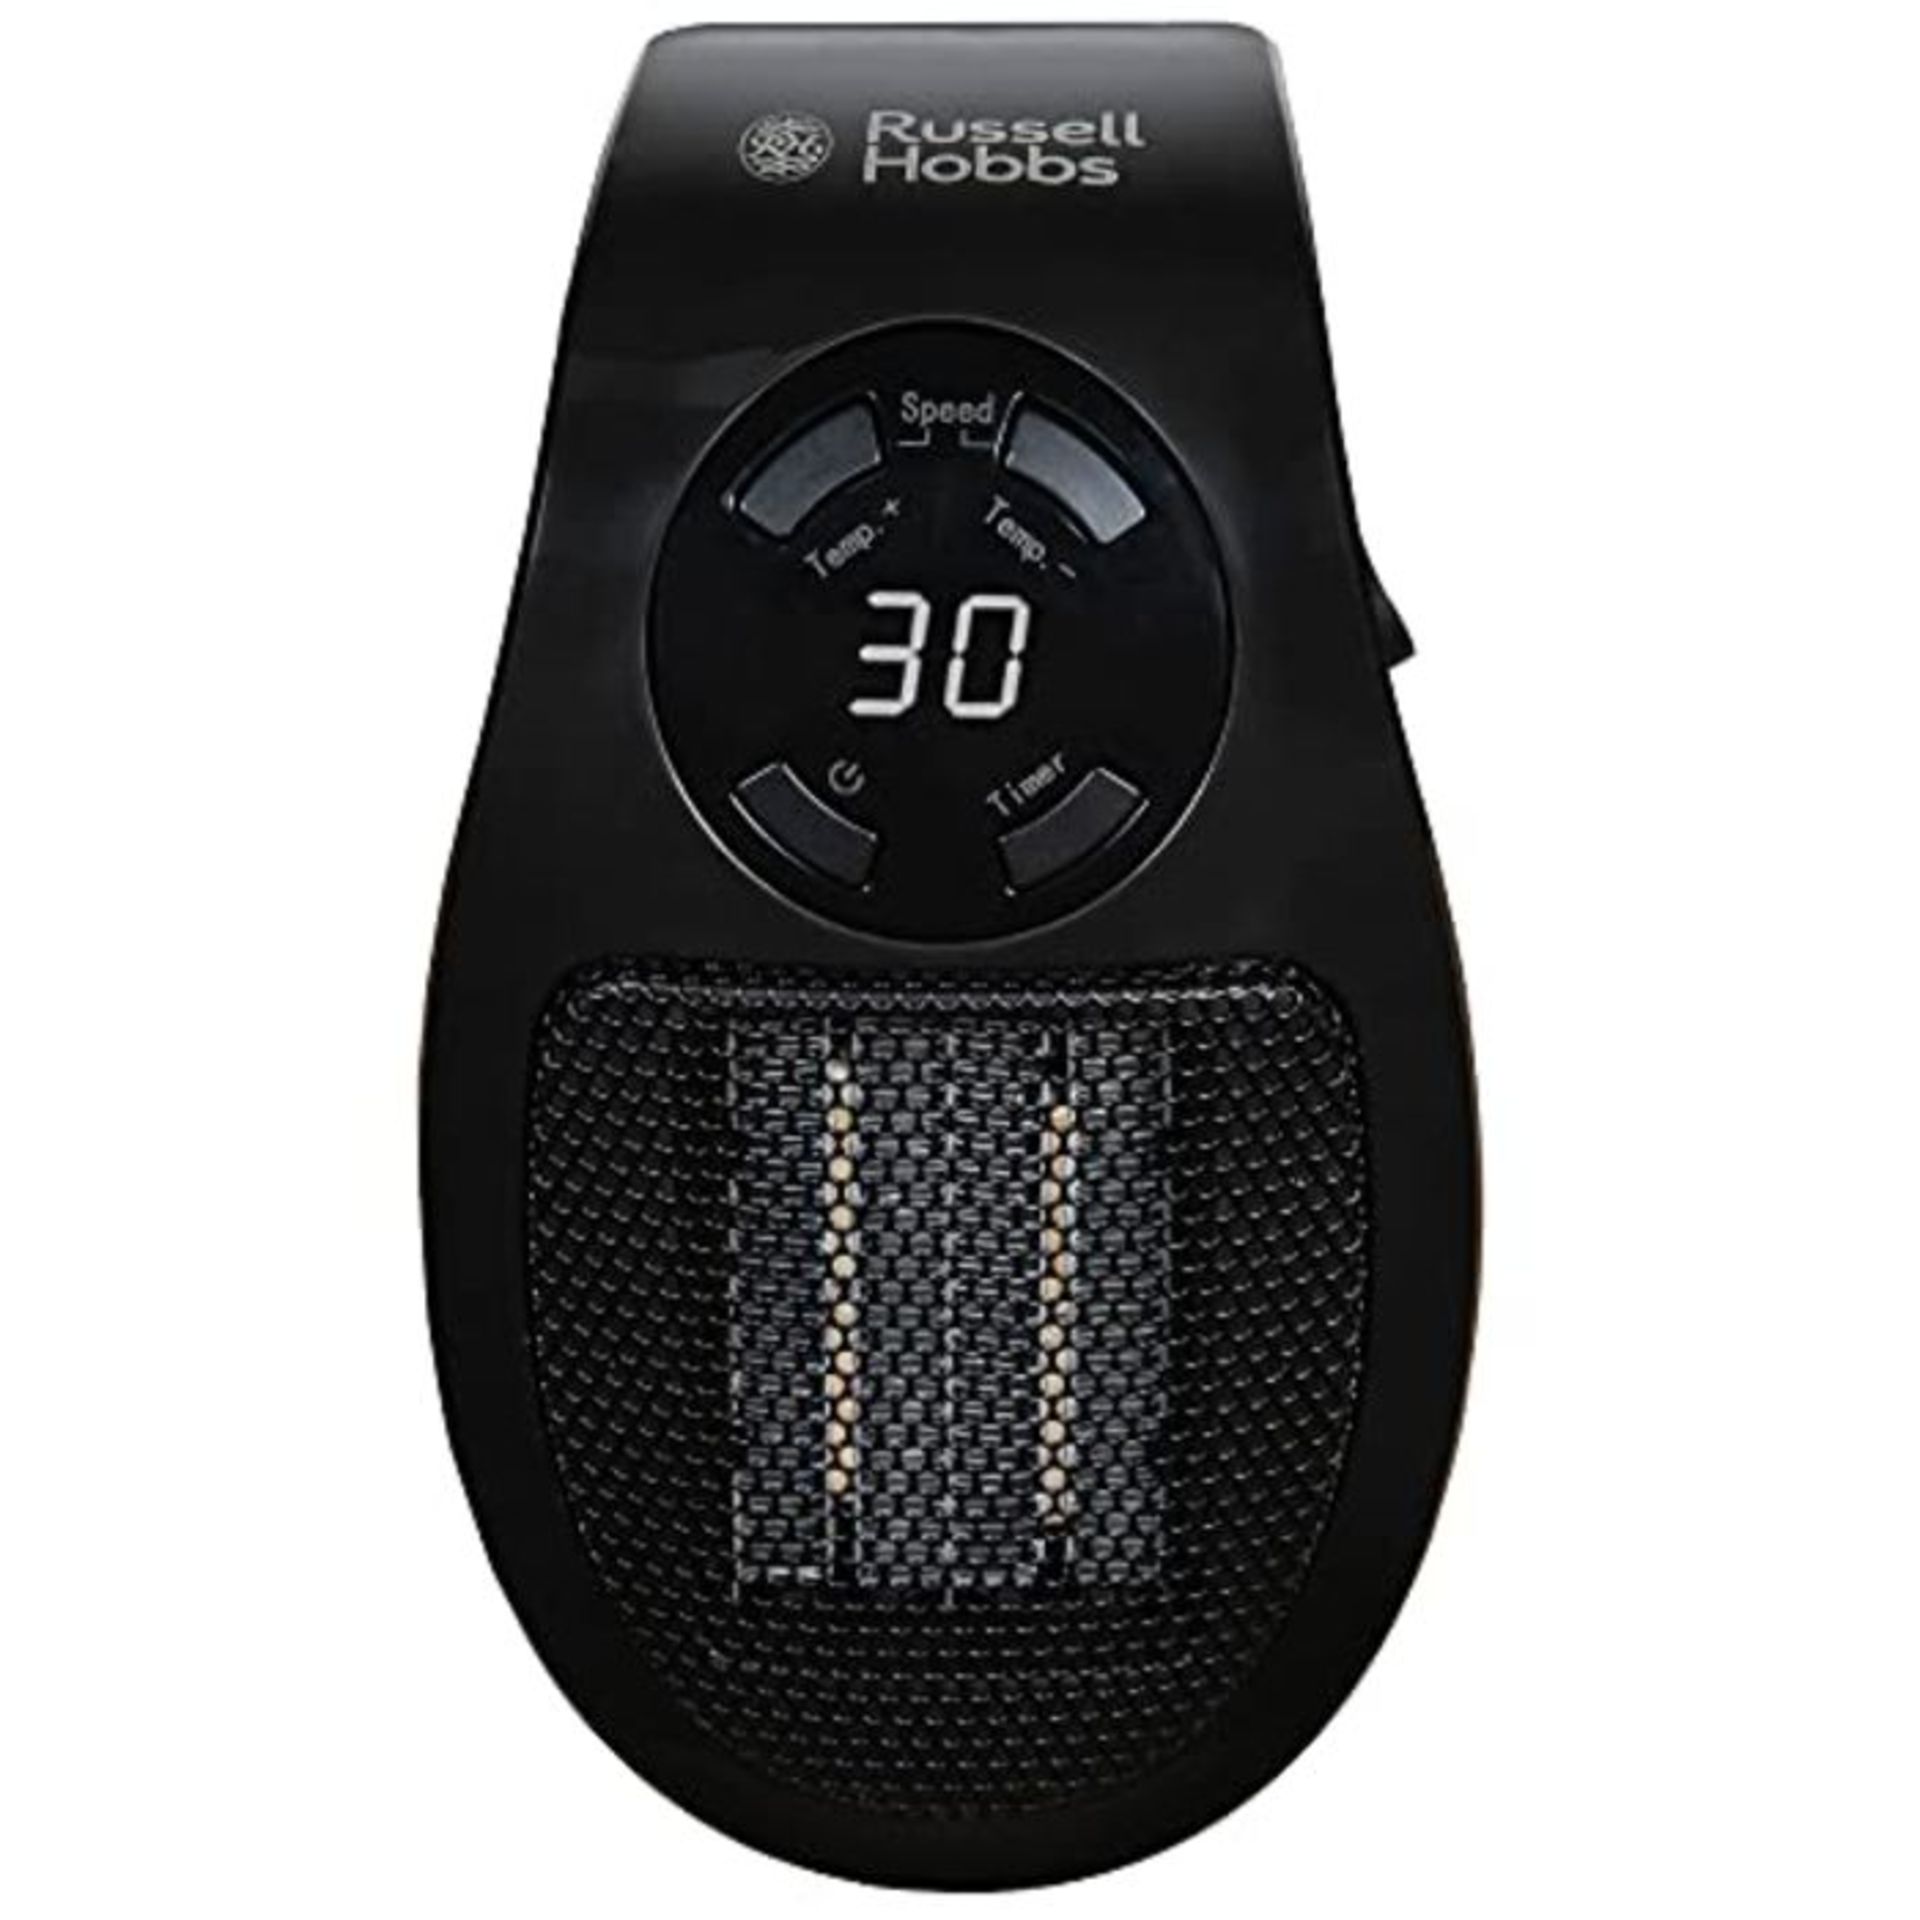 Russell Hobbs 500W Ceramic Plug Heater, Electric Heater Adjustable thermostat, 12 Hour - Image 4 of 6